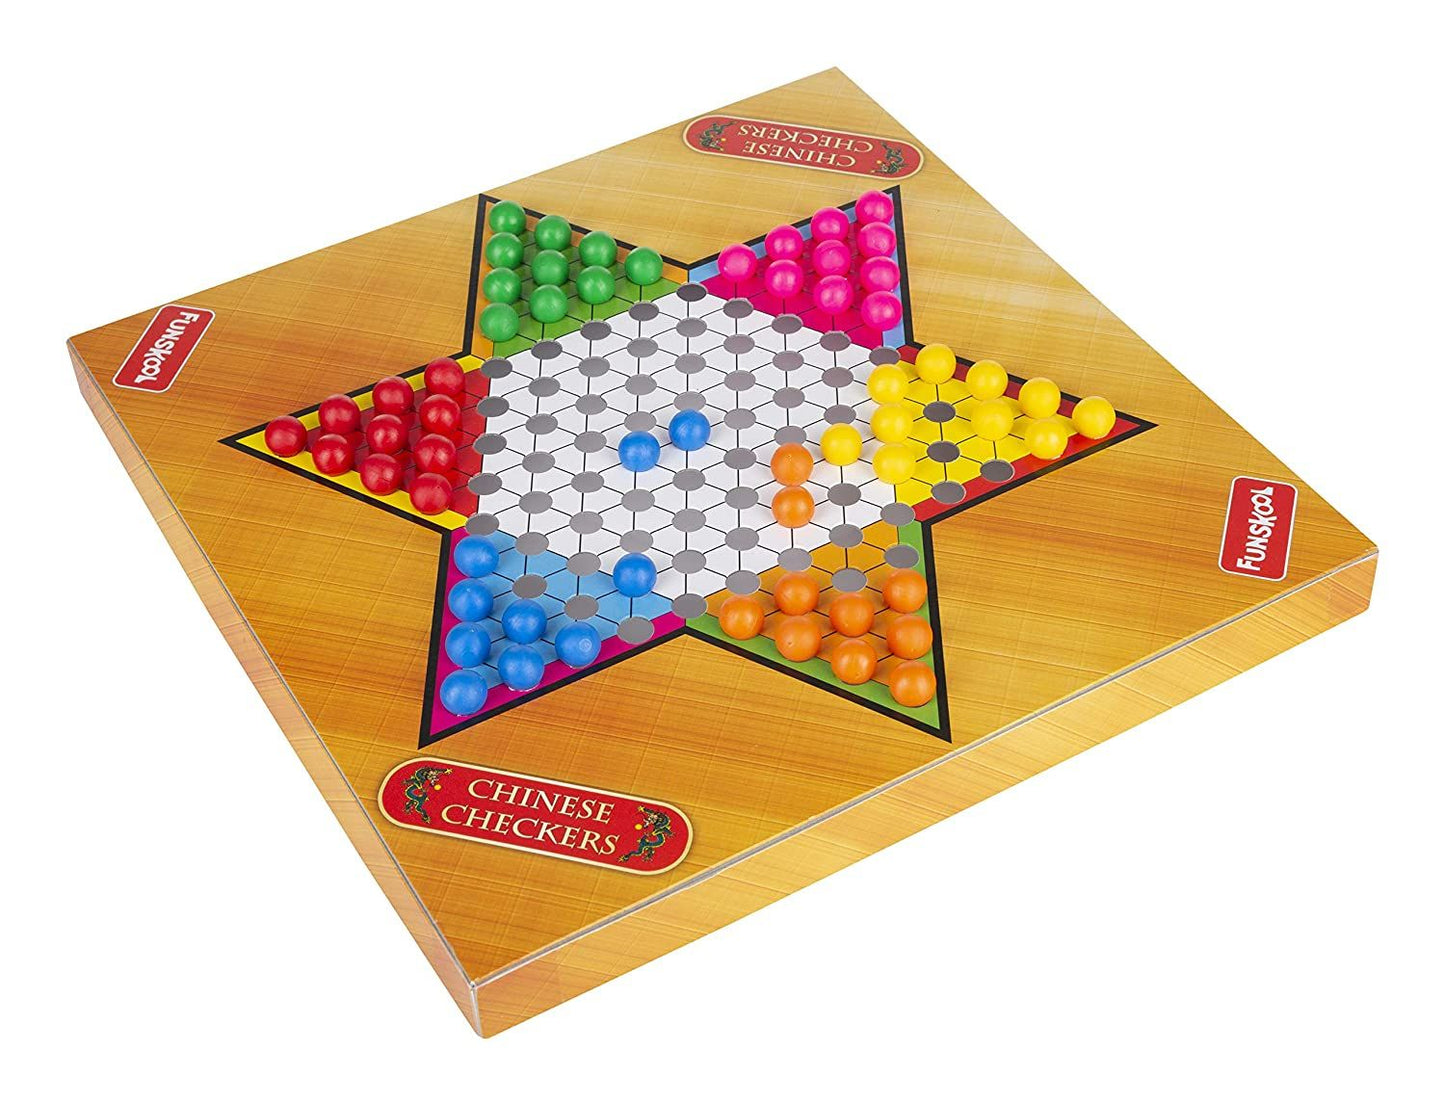 Chinese Checkers - The Classic Strategy Board Game